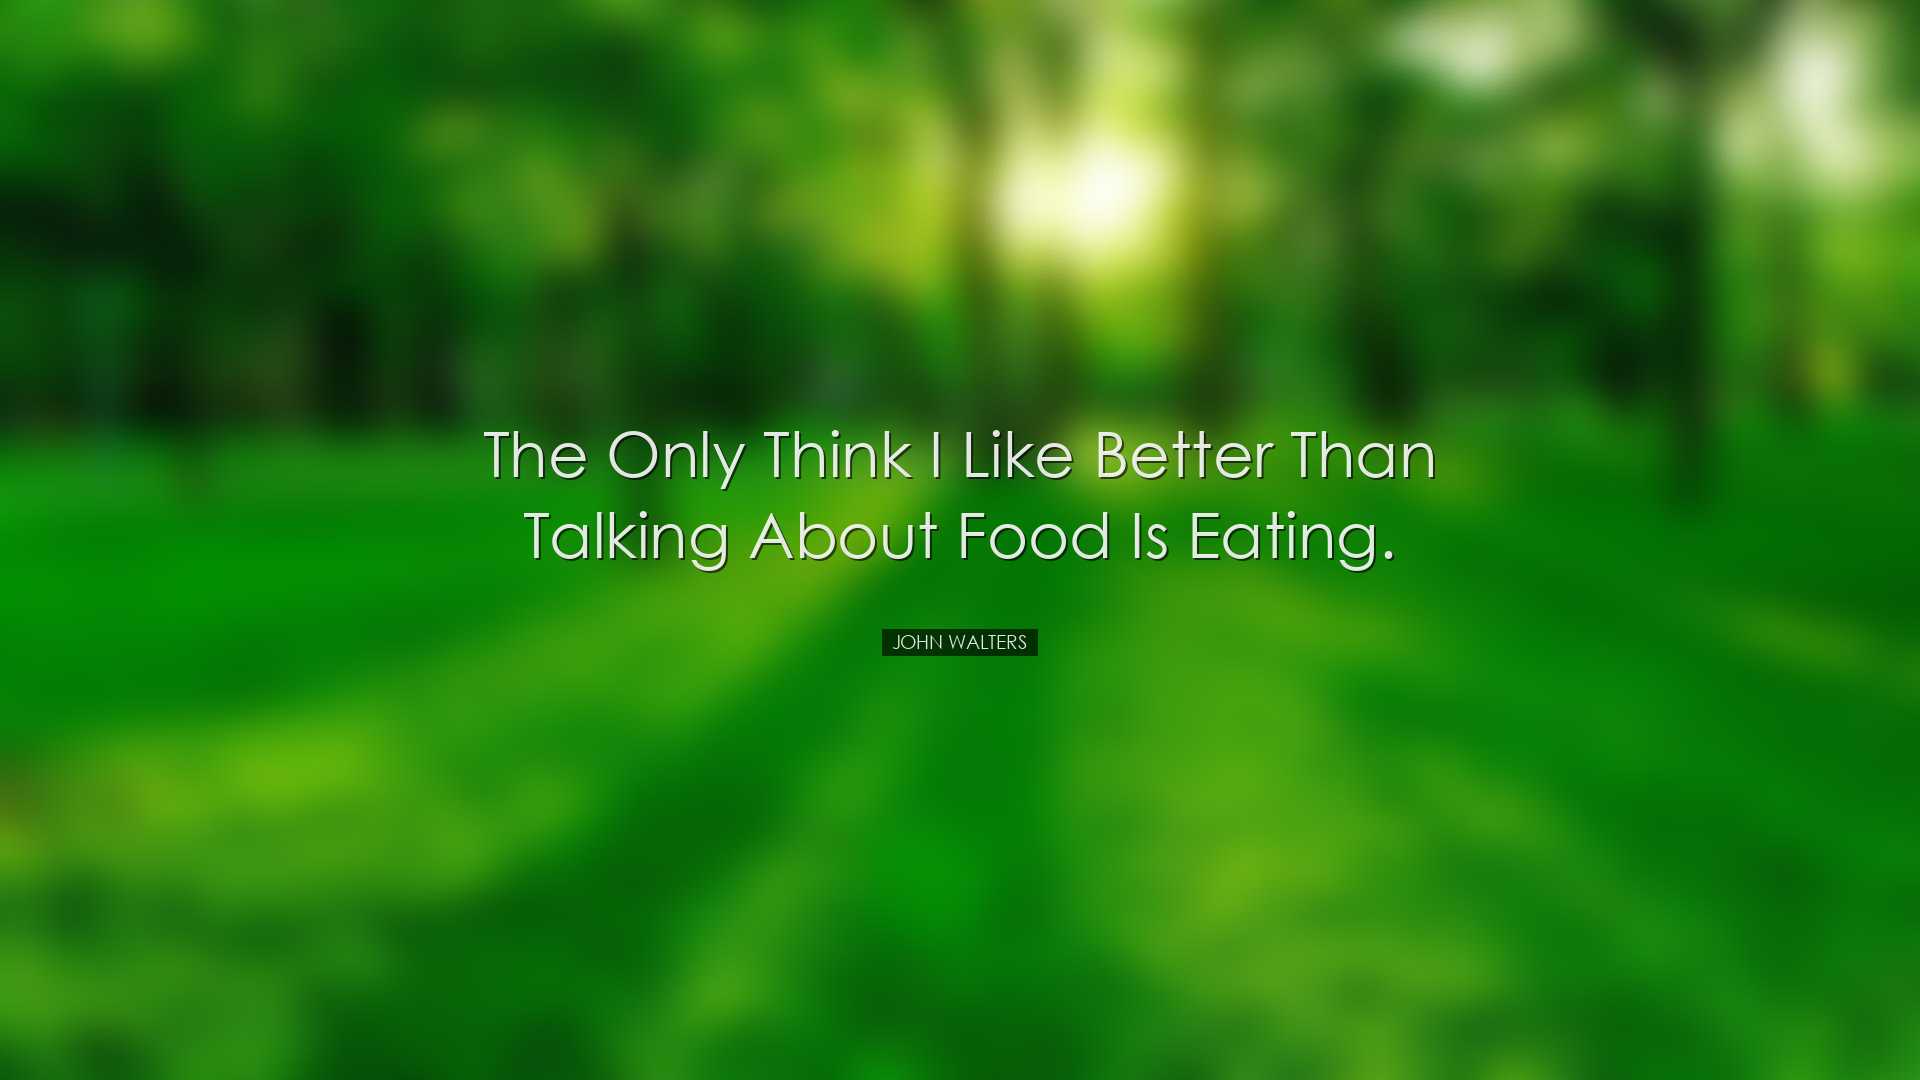 The only think I like better than talking about Food is eating. -